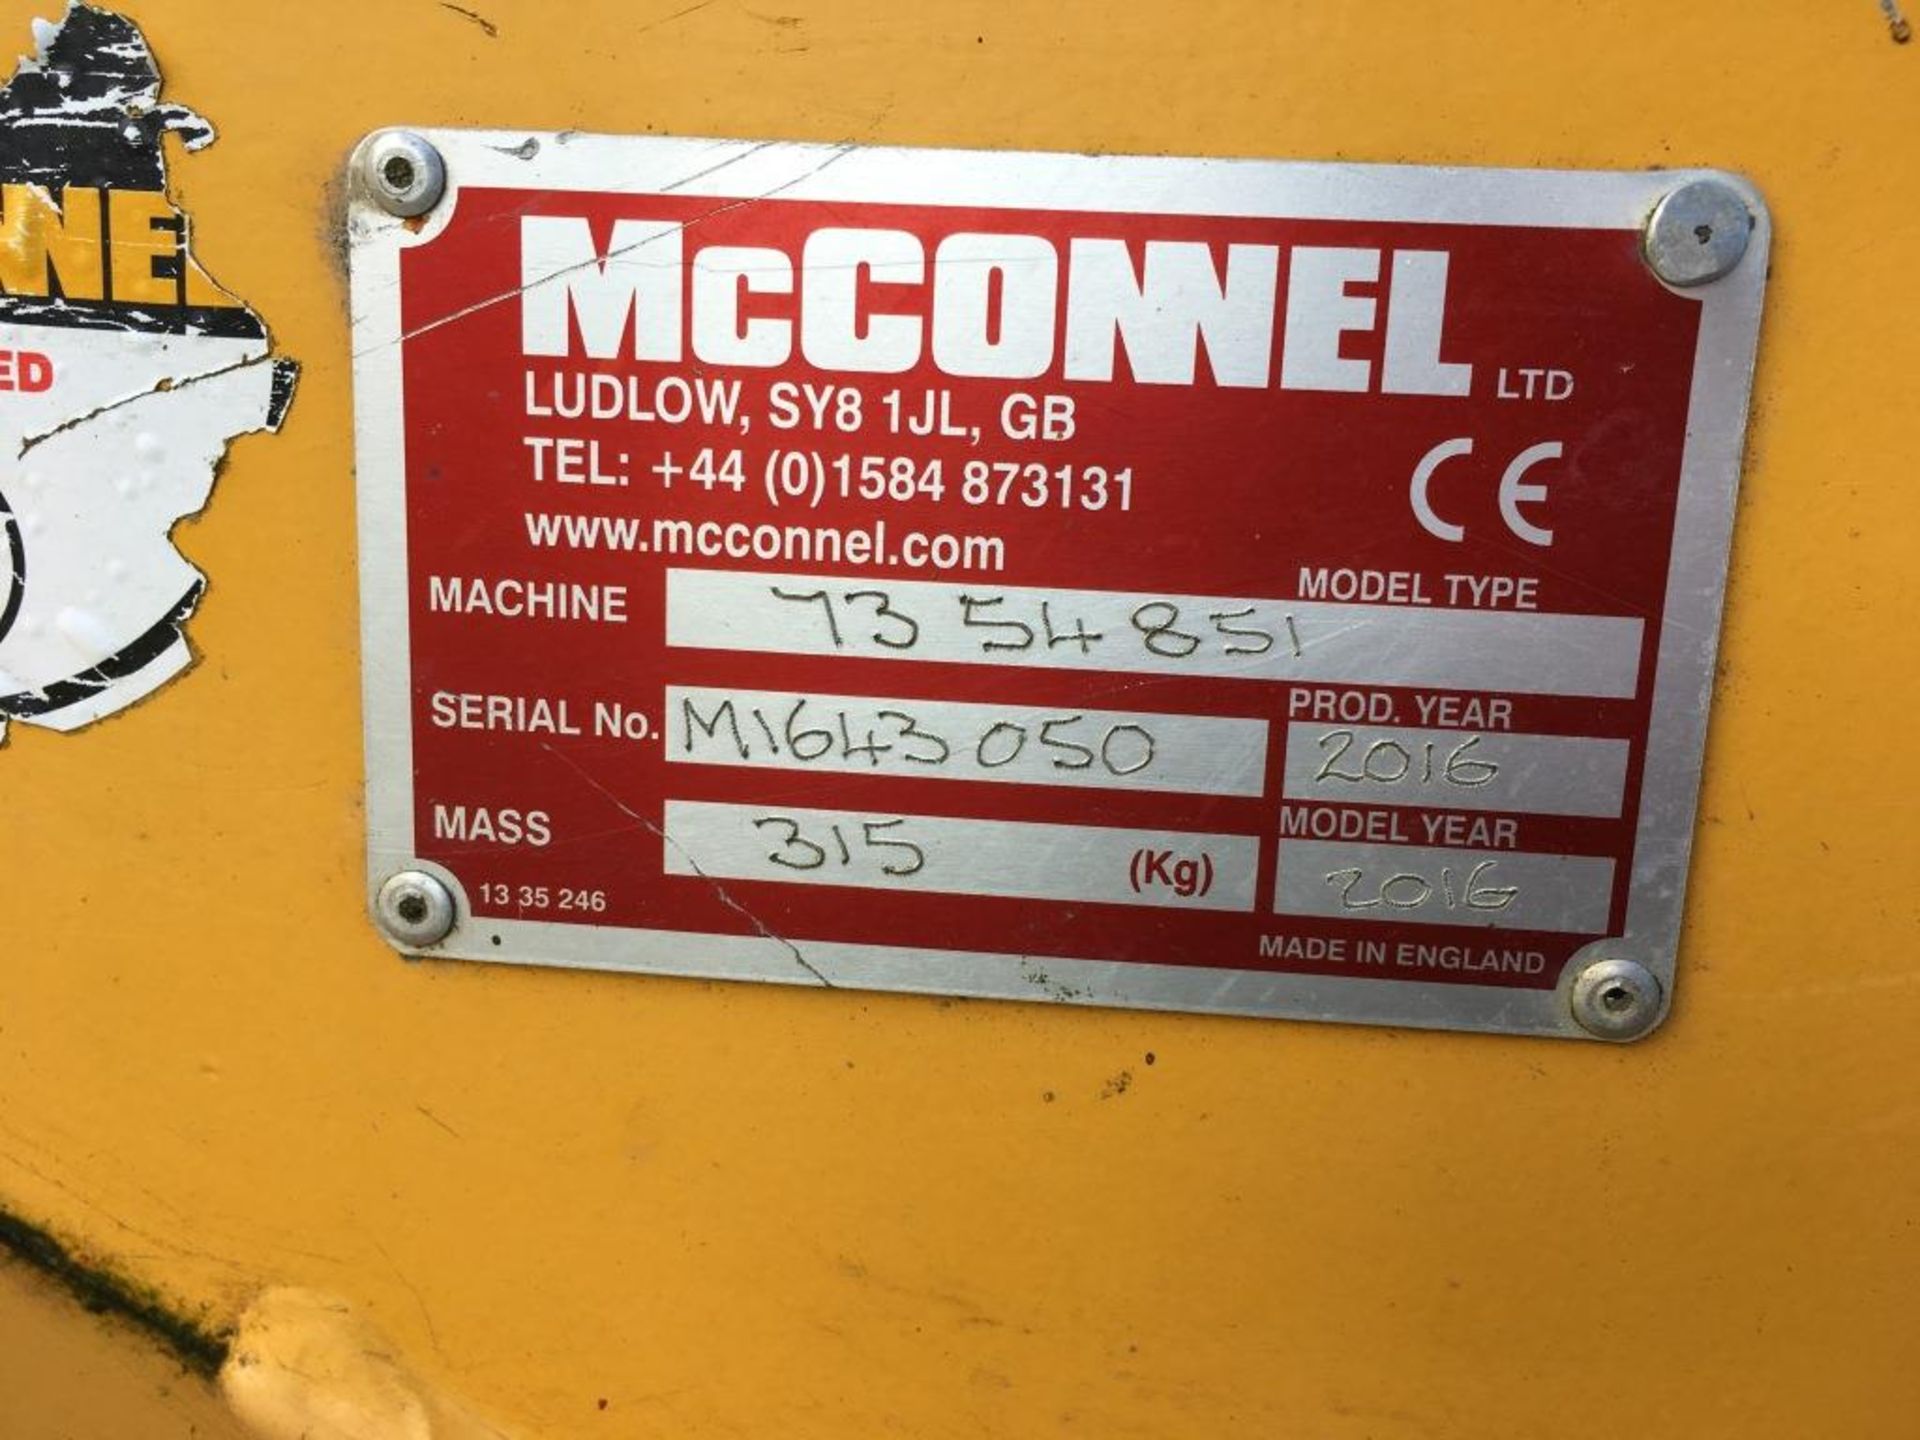 McConnel Power Arm 5860, YOM: 2016, No. M1643050/2722 - Image 5 of 7